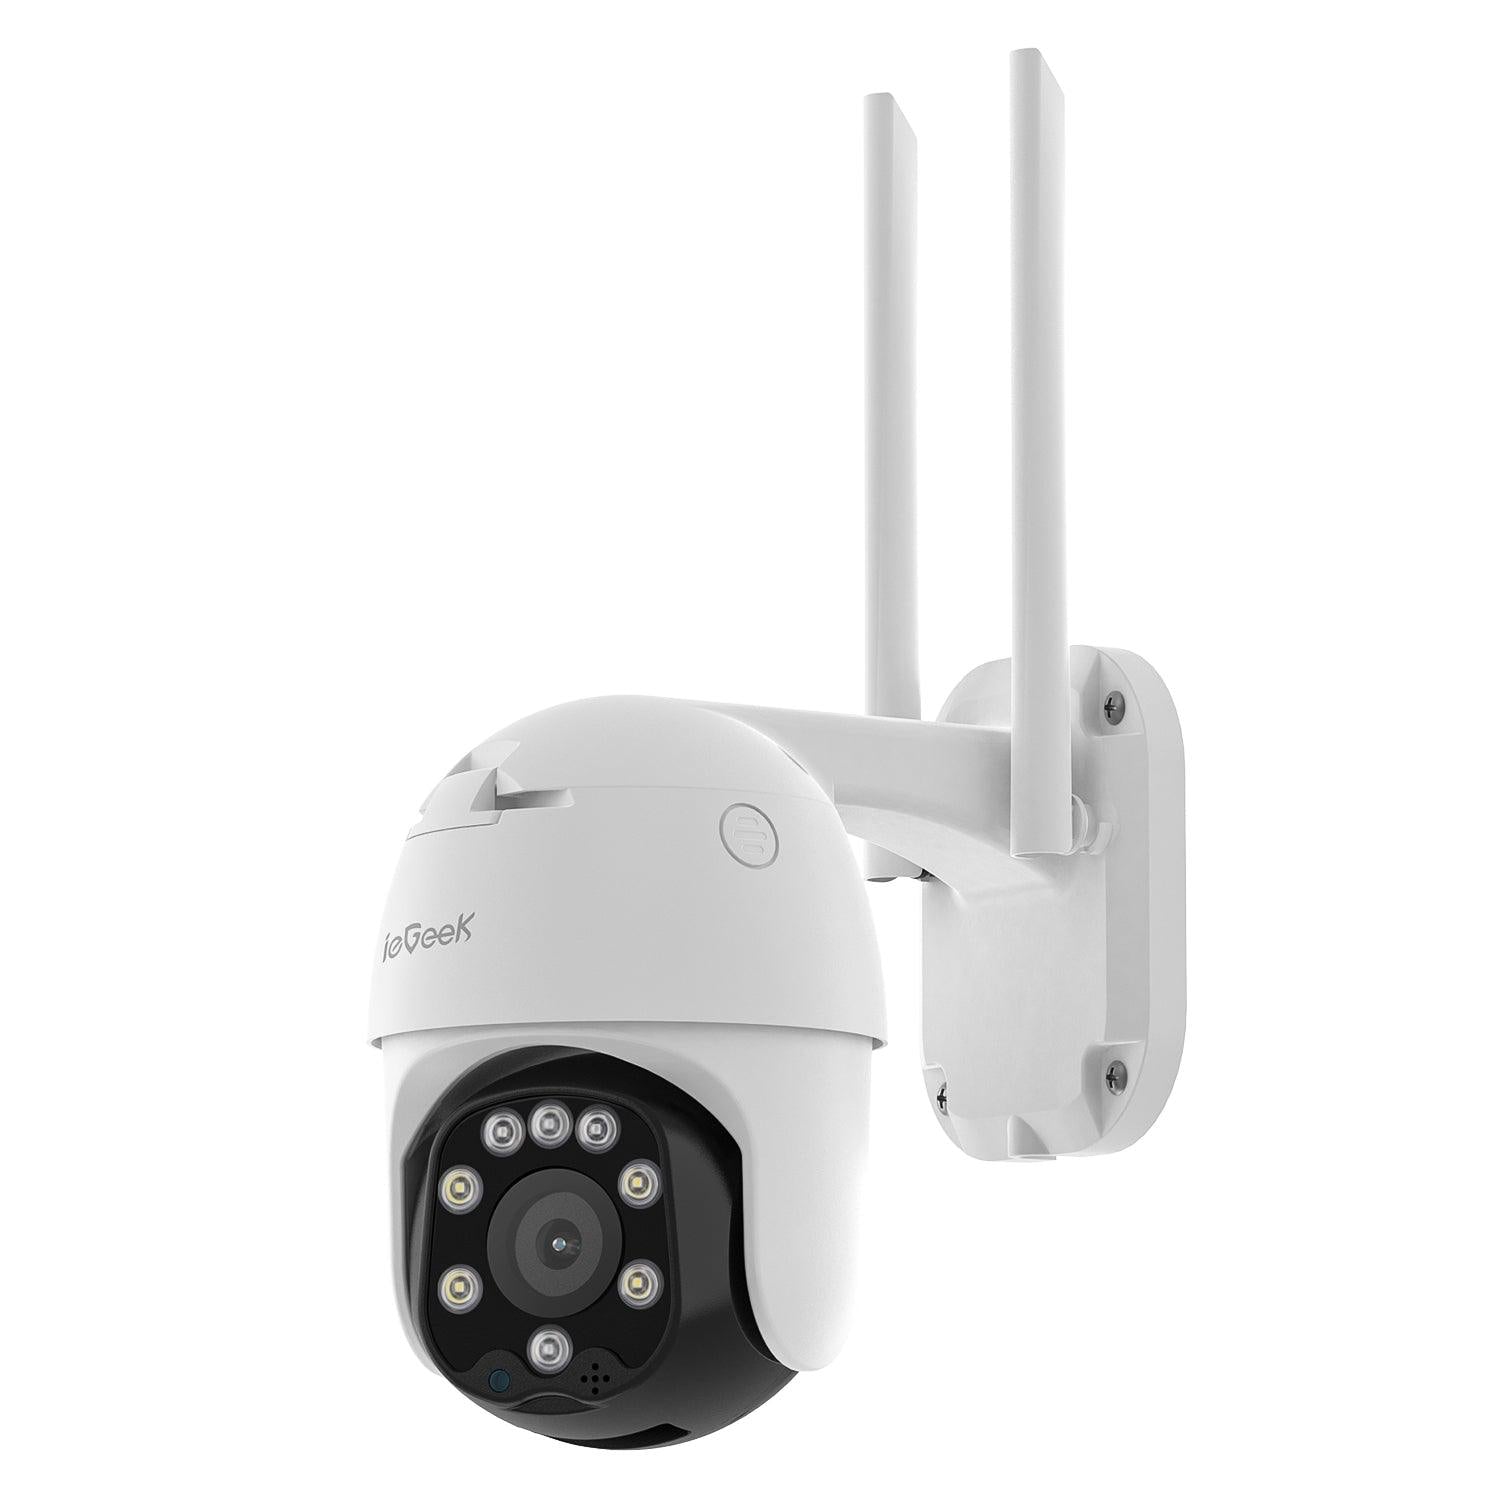 ieGeek IE20 - Smart 1080P Wireless PTZ Camera with Night Vision